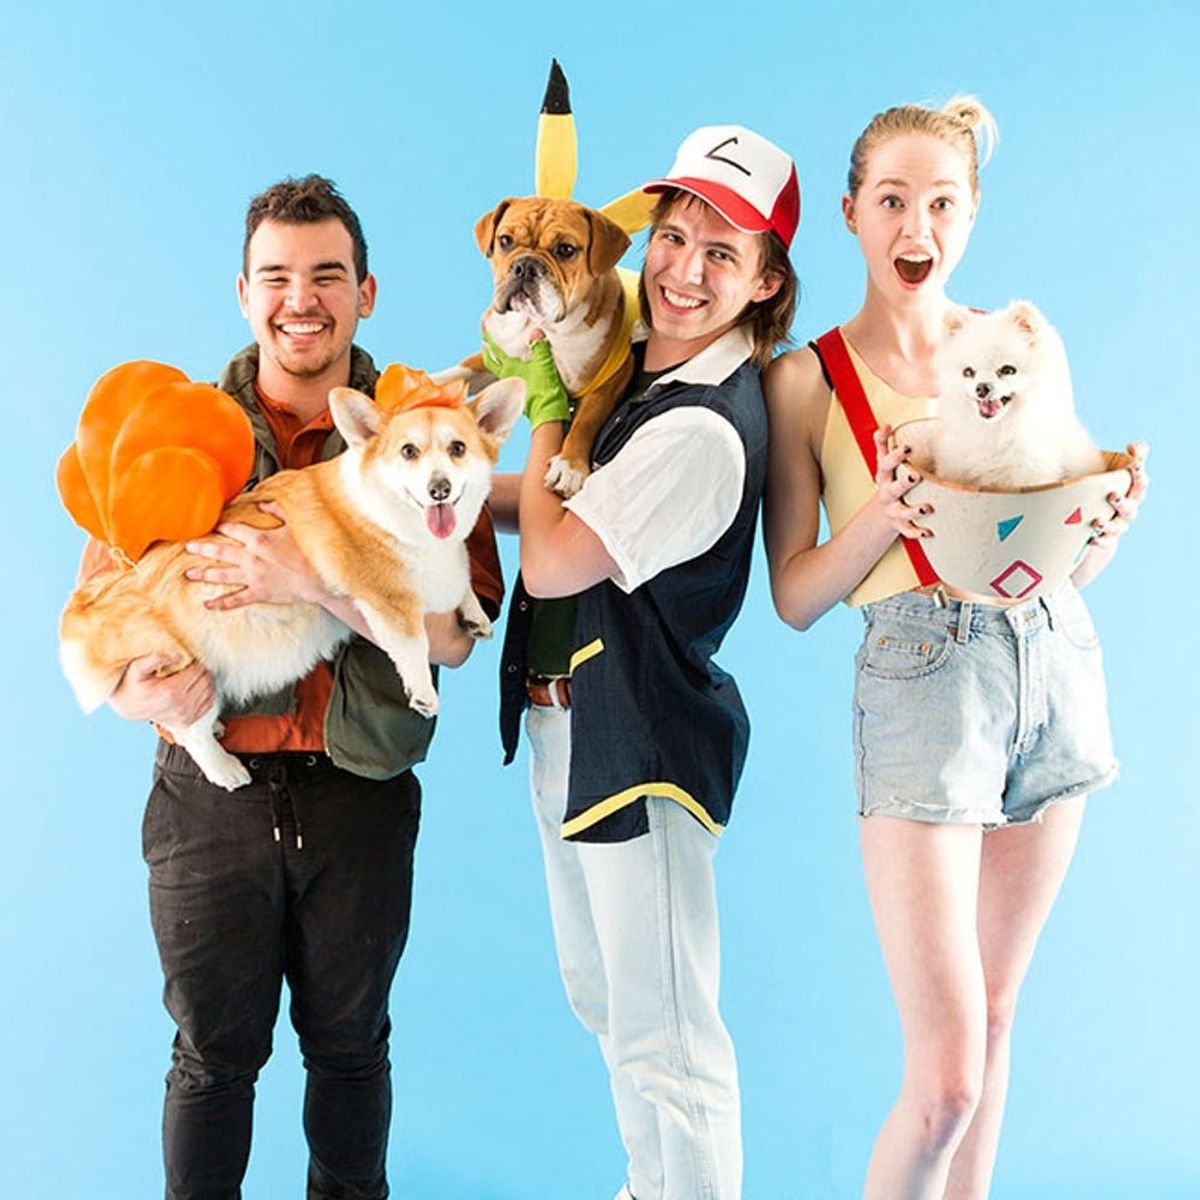 This Group Pokémon Costume Involves Your Friends and Pets